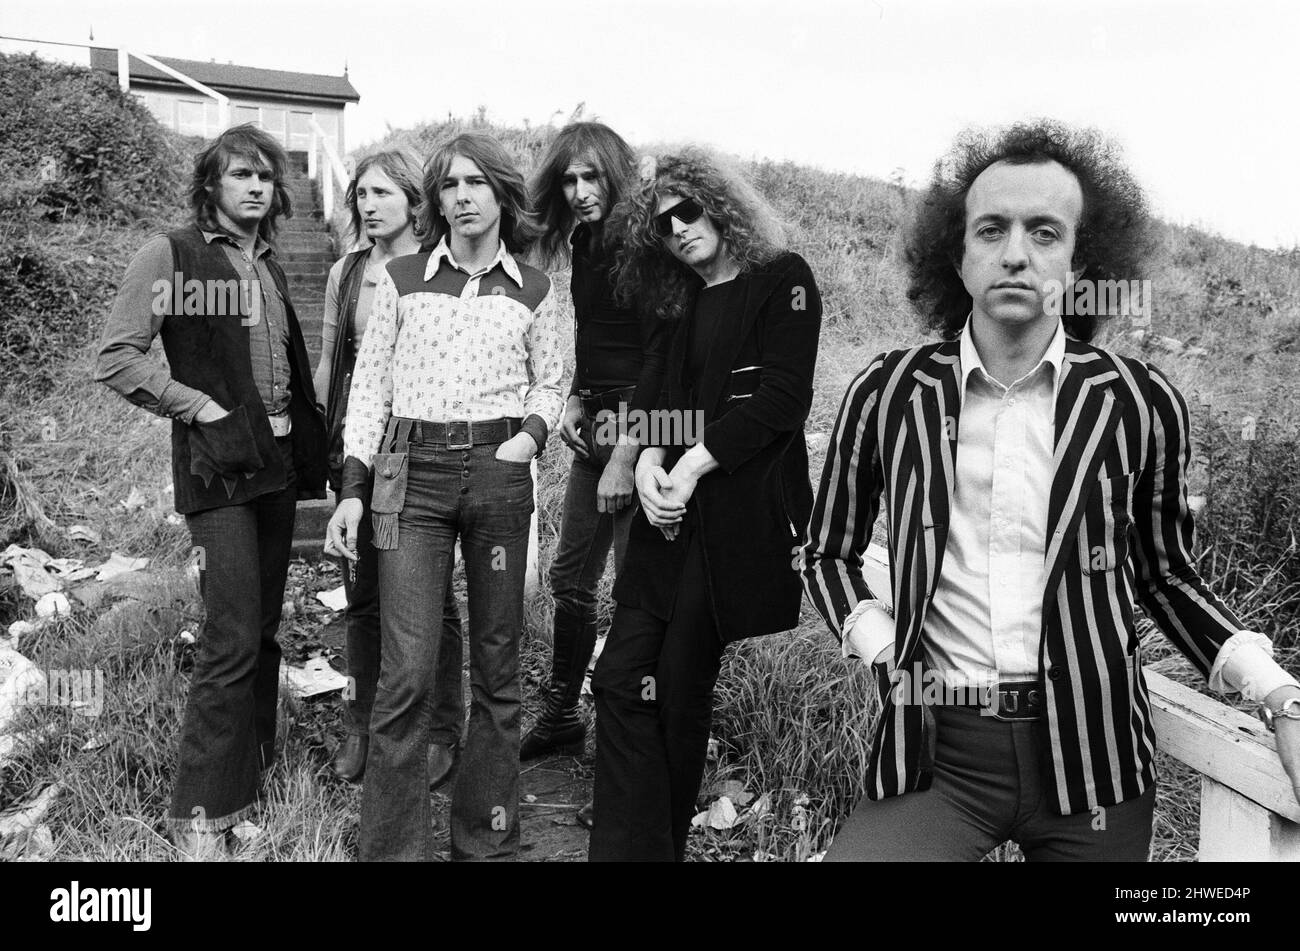 Mott the Hoople pop group, band members are Verden Allen, Buffin (Dale Griffin), Mick Ralphs, Overend Watts, Ian Hunter and Guy Stevens. 17th September 1970. Stock Photo